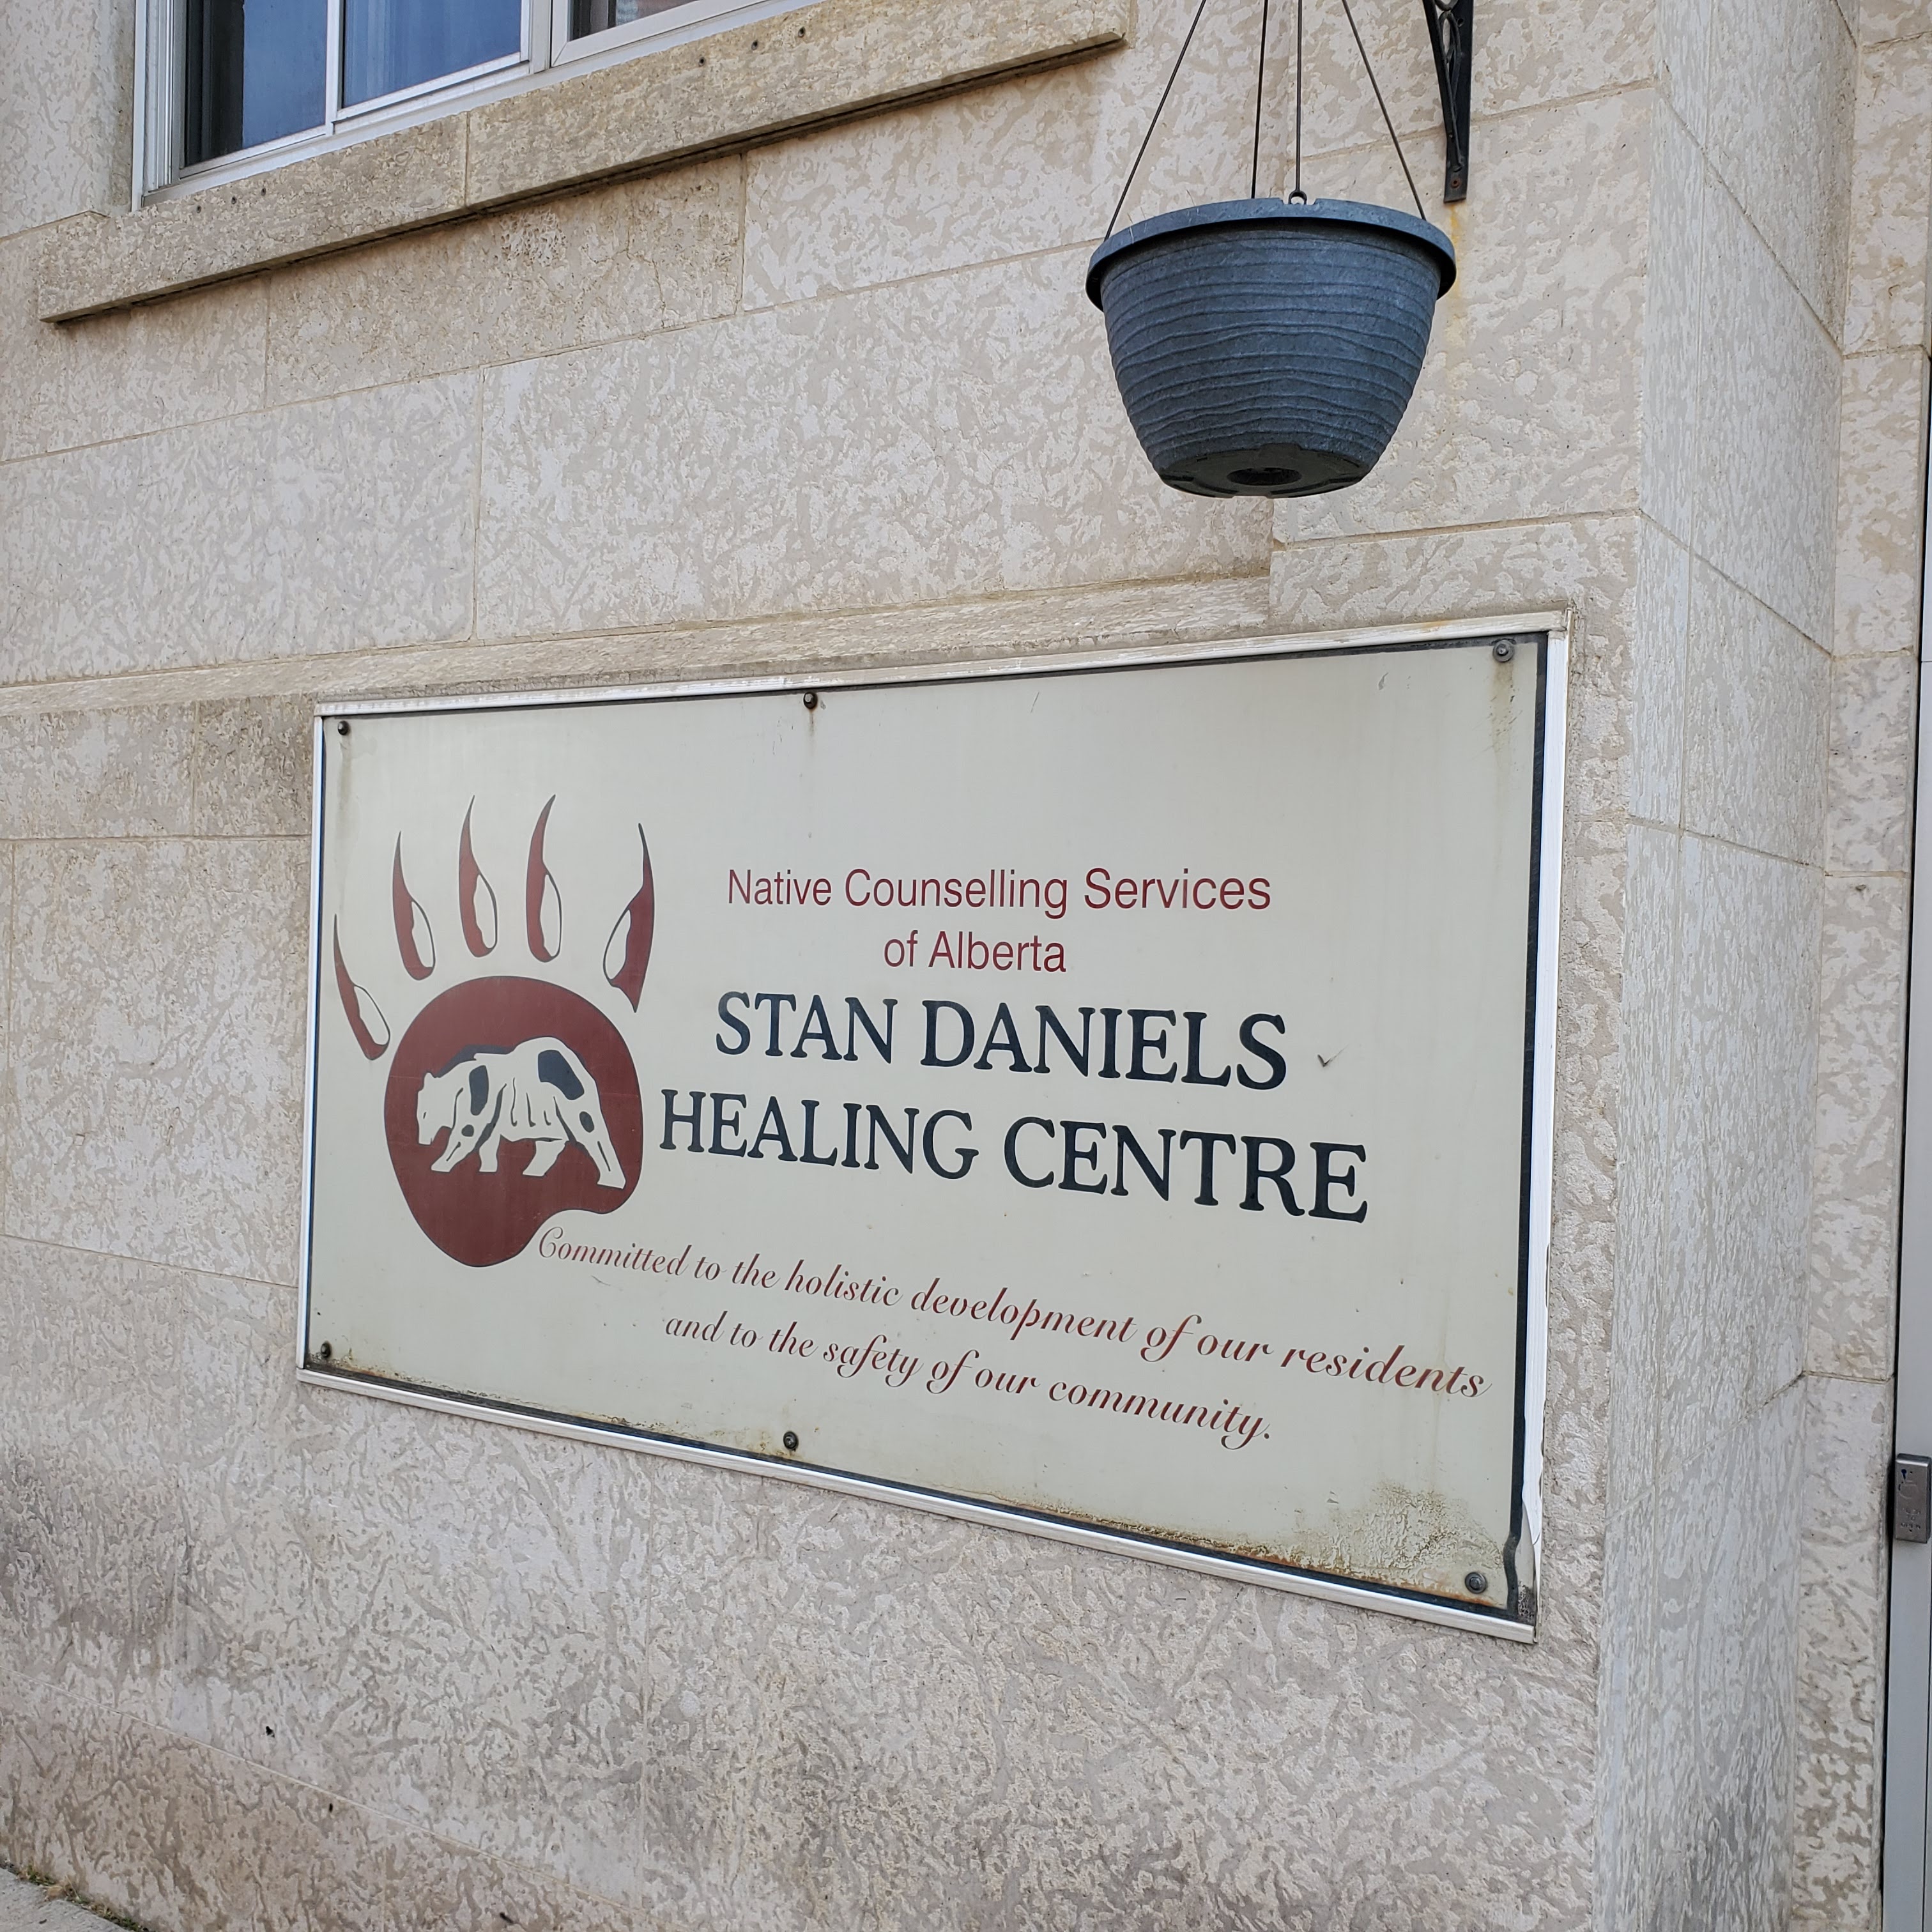 Photo of a plaque for Stan Daniels Healing Centre (a Healing Lodge operated by the Native Counselling services of Alberta).